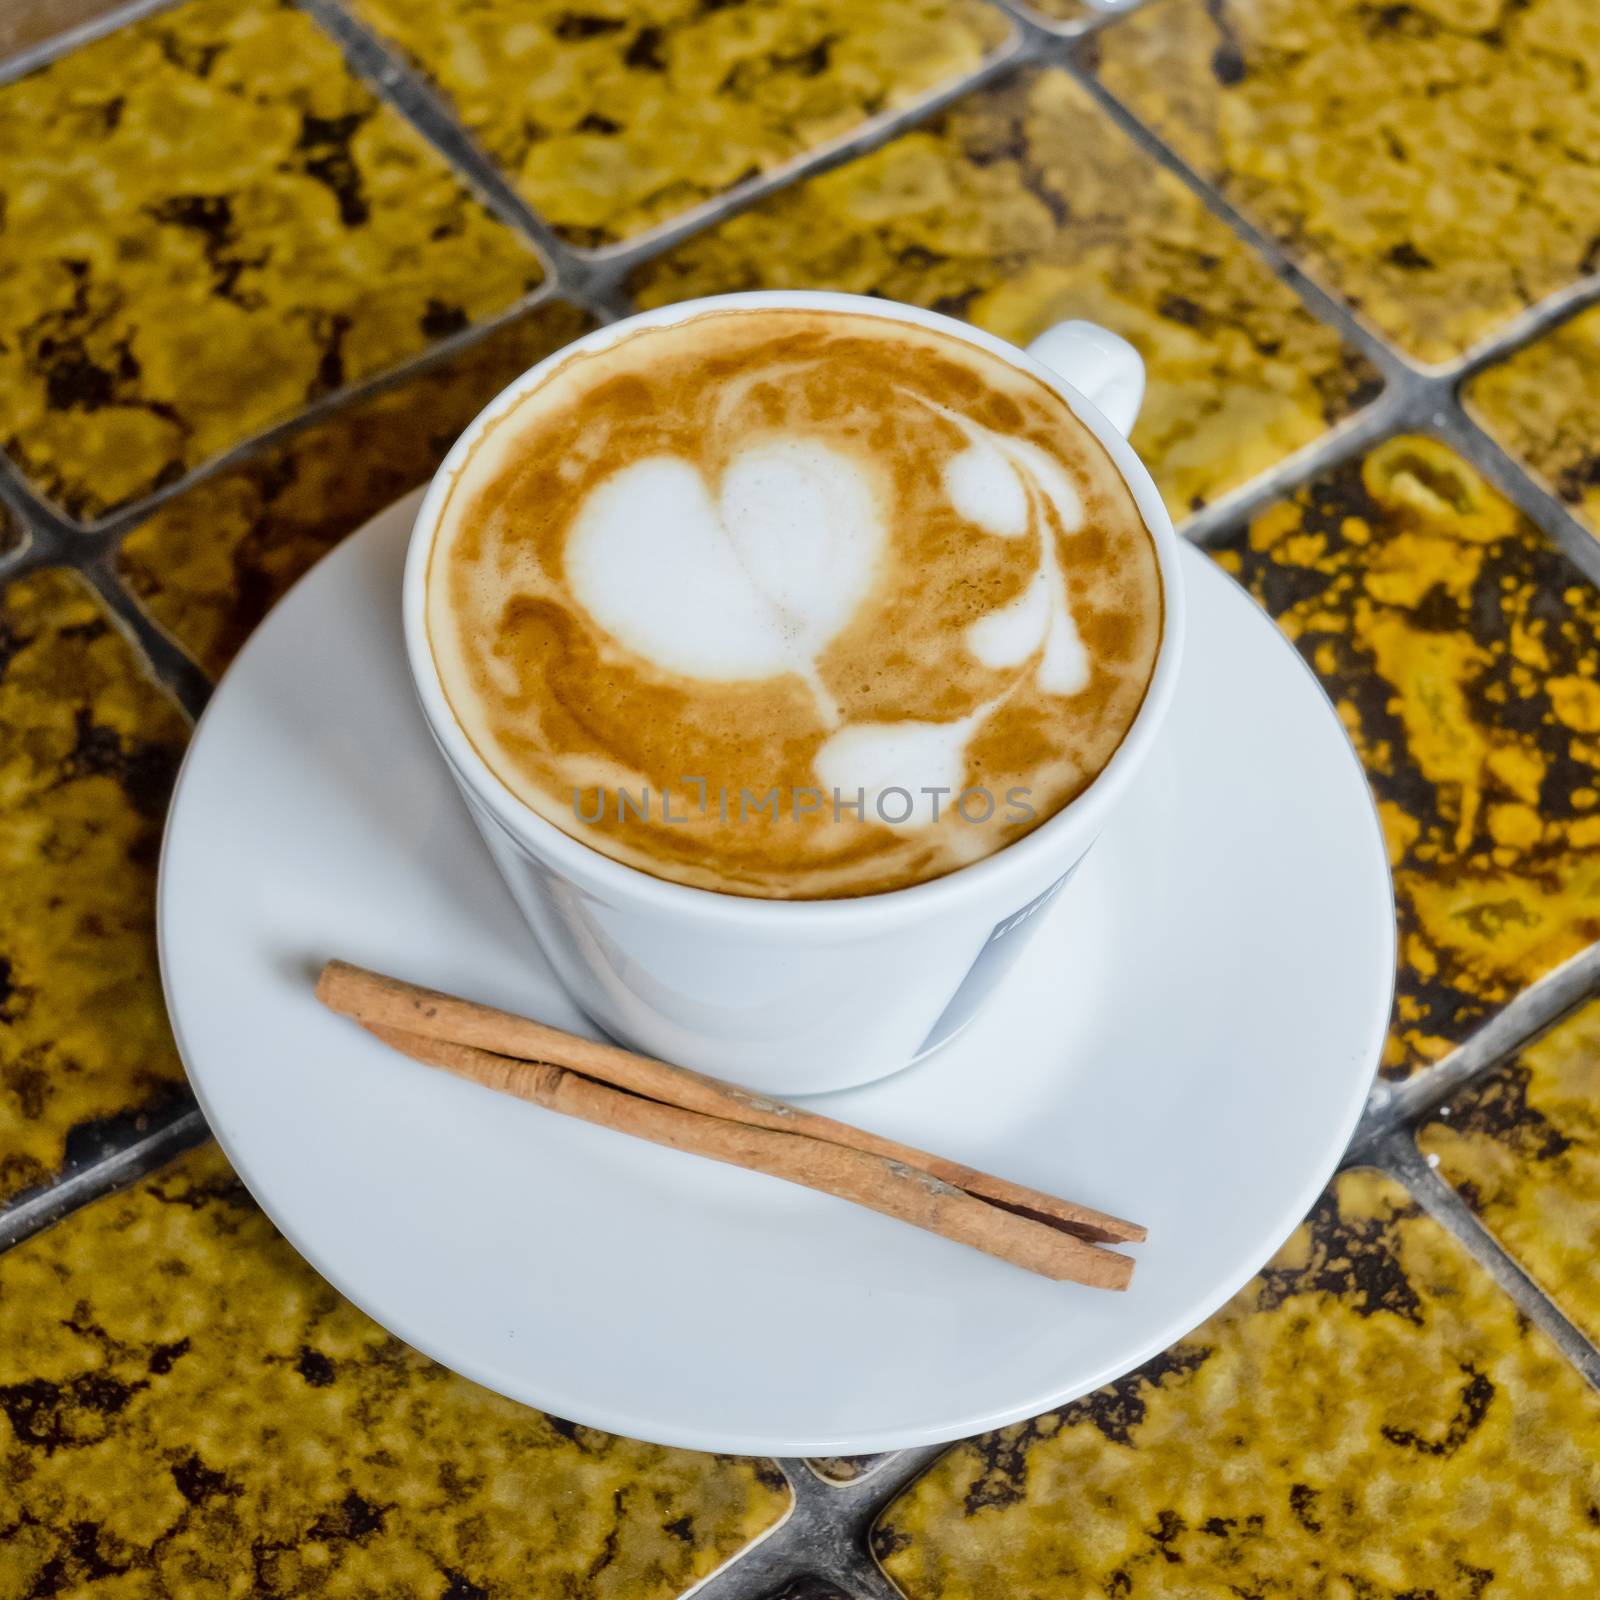 A cup of cafe latte and Cinnamon stick.